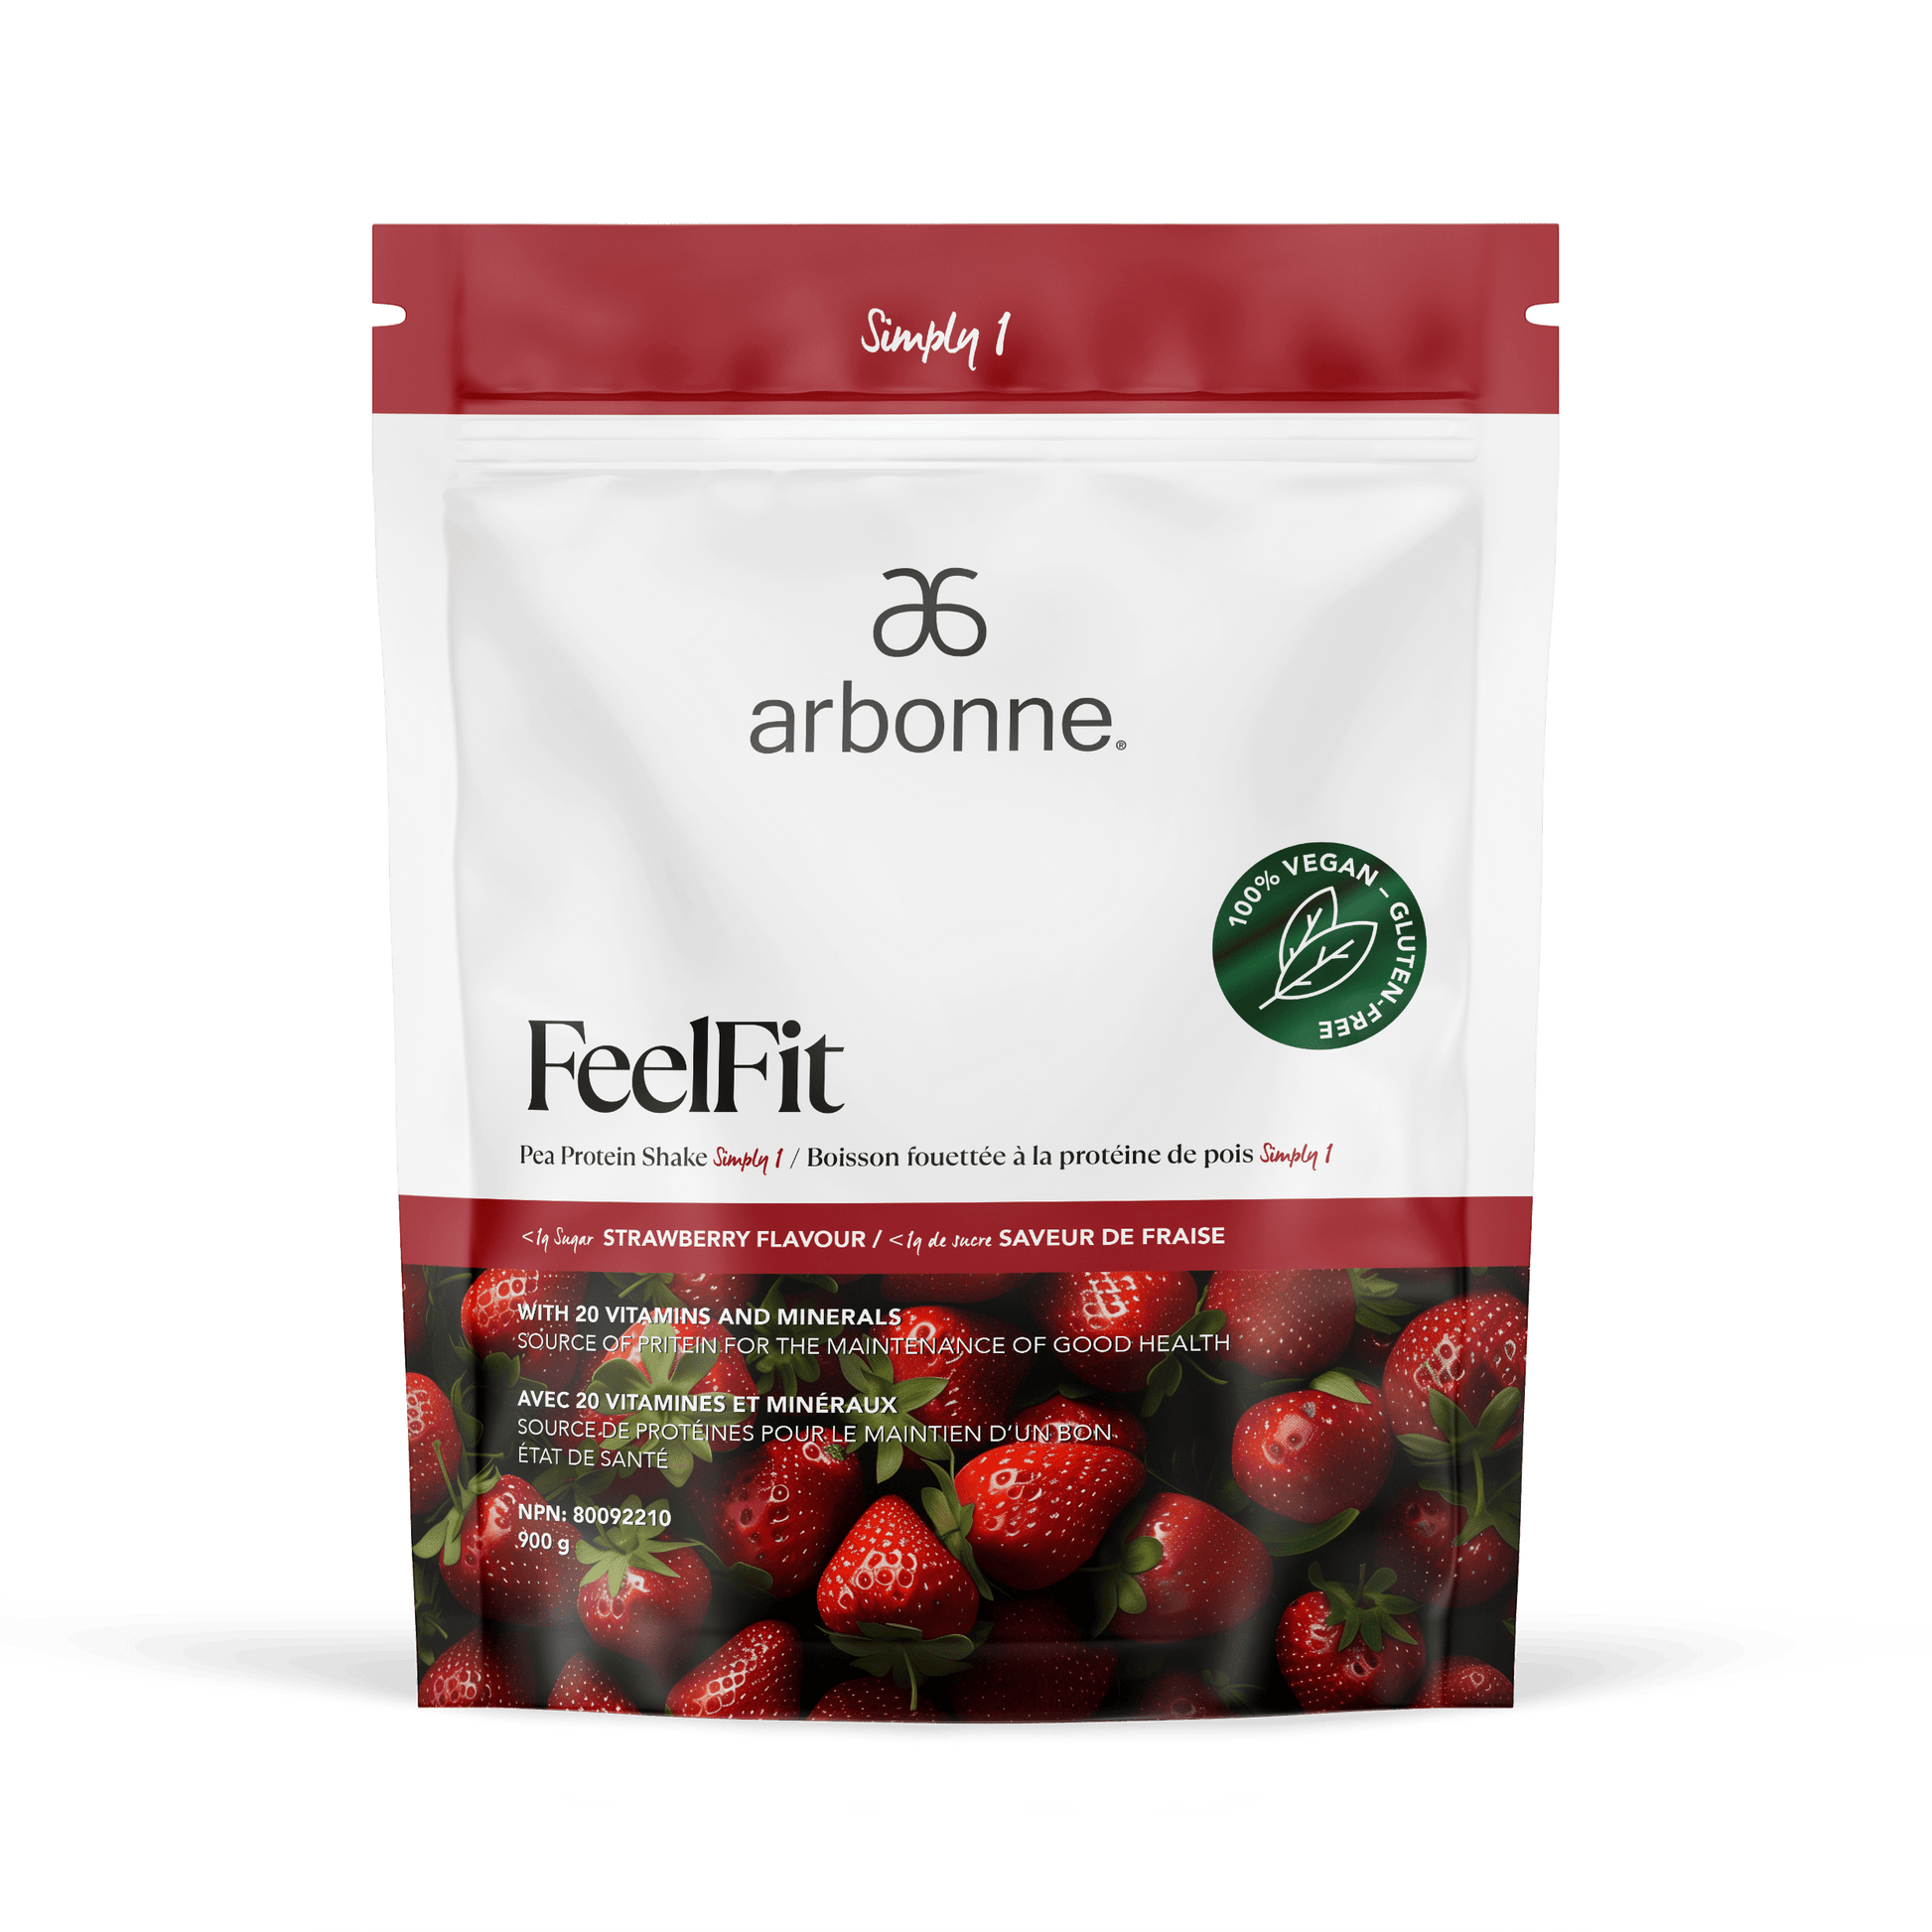 Arbonne FeelFit vegan pea protein powder in strawberry flavor, featuring vibrant strawberries on the packaging with a prominent green vegan certification seal, set against a white backdrop.